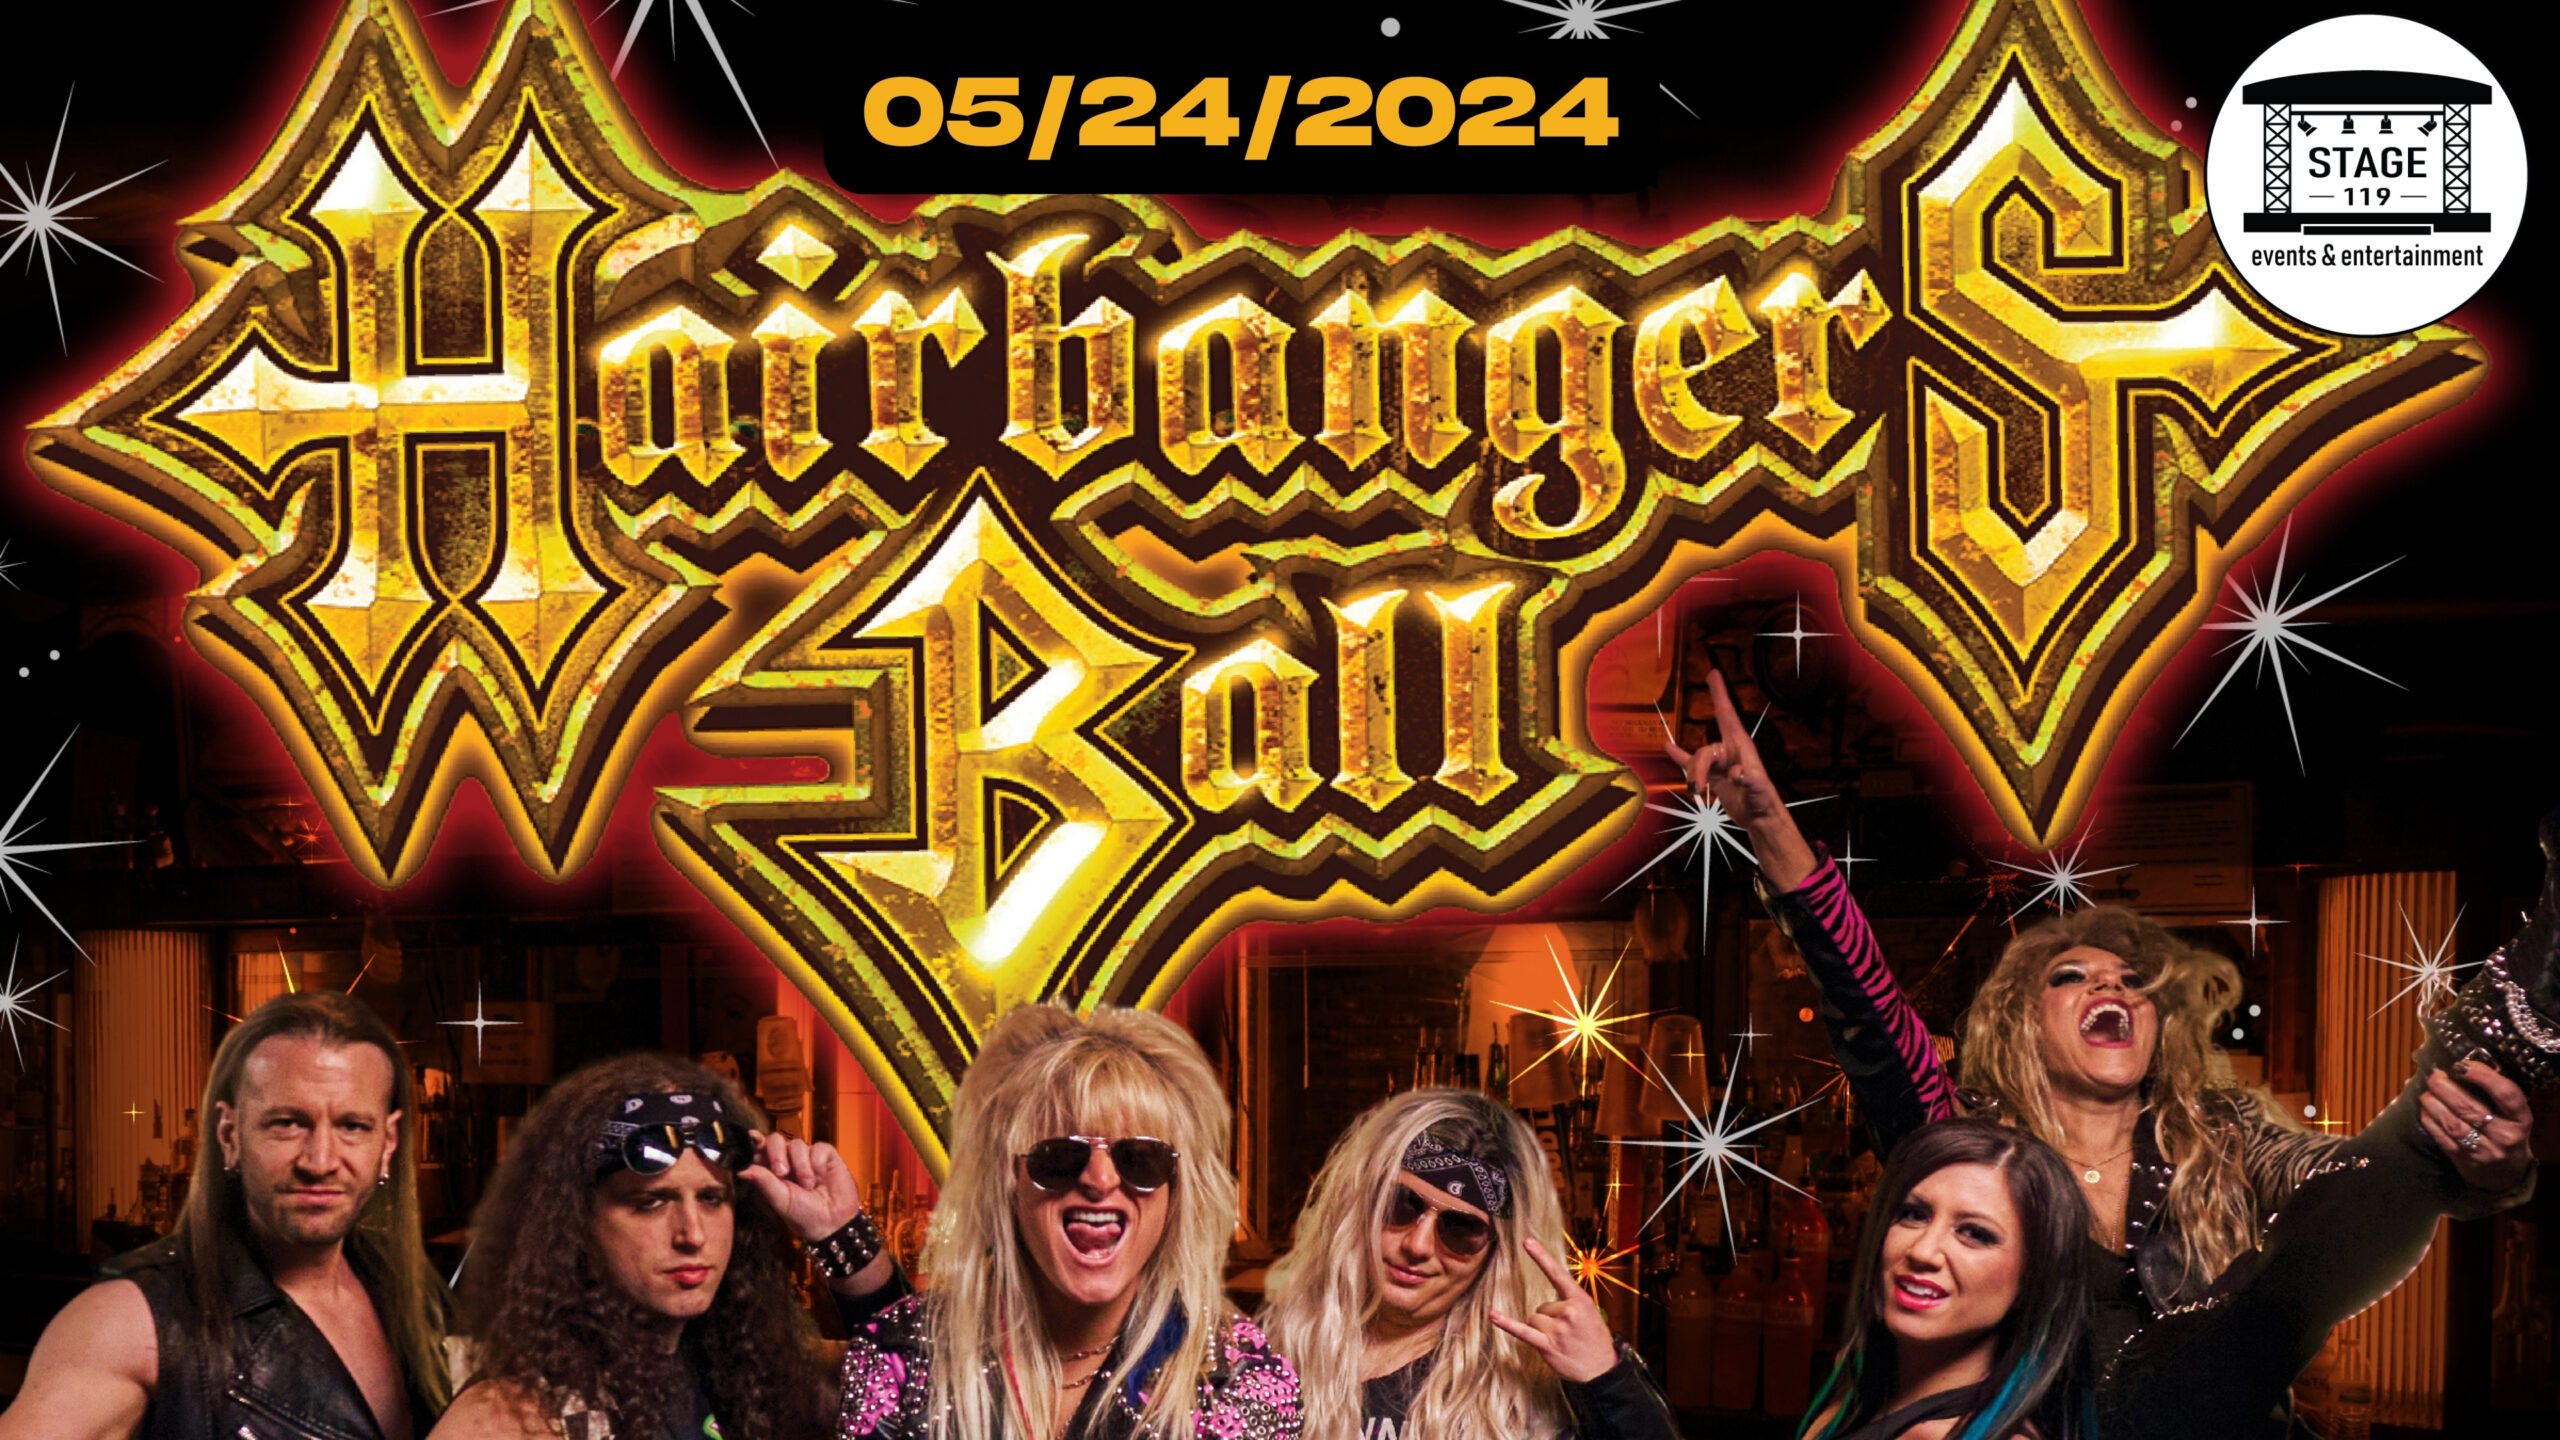 Harbingers Ball at Stage 119